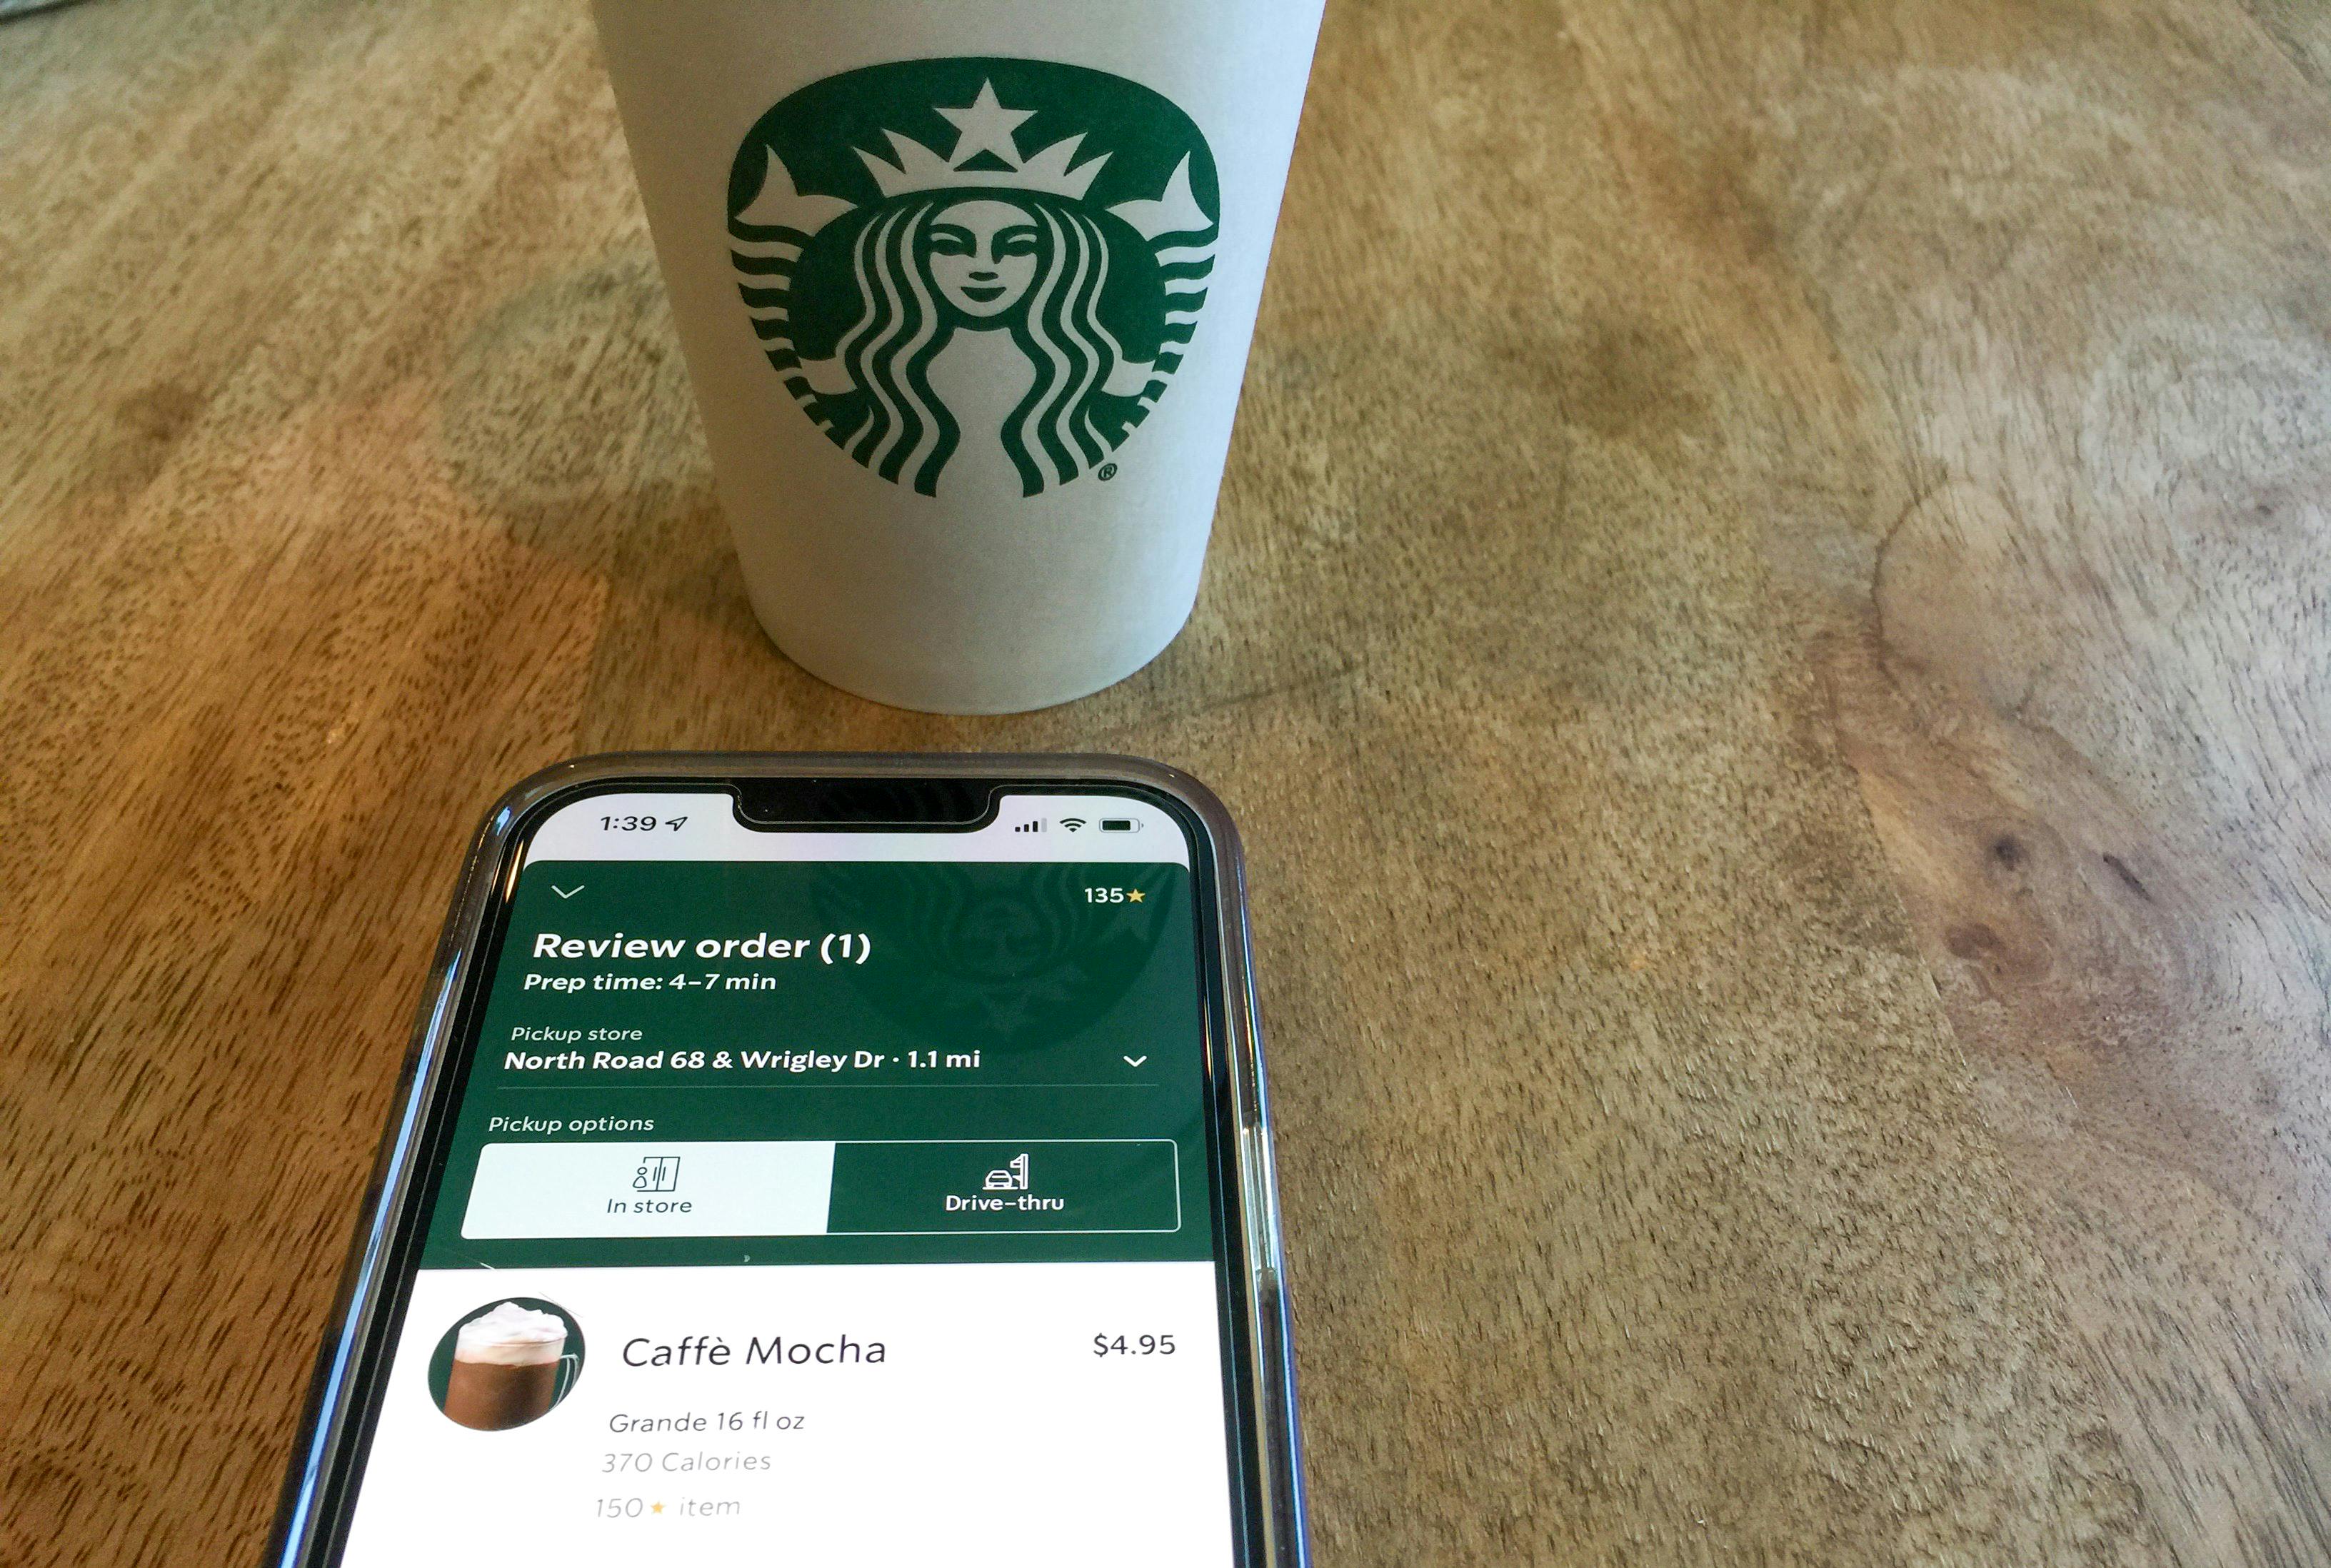 An iPhone on a table next to a Starbucks cup, displaying an order for a Grande Caffè Mocha on the Starbucks app.